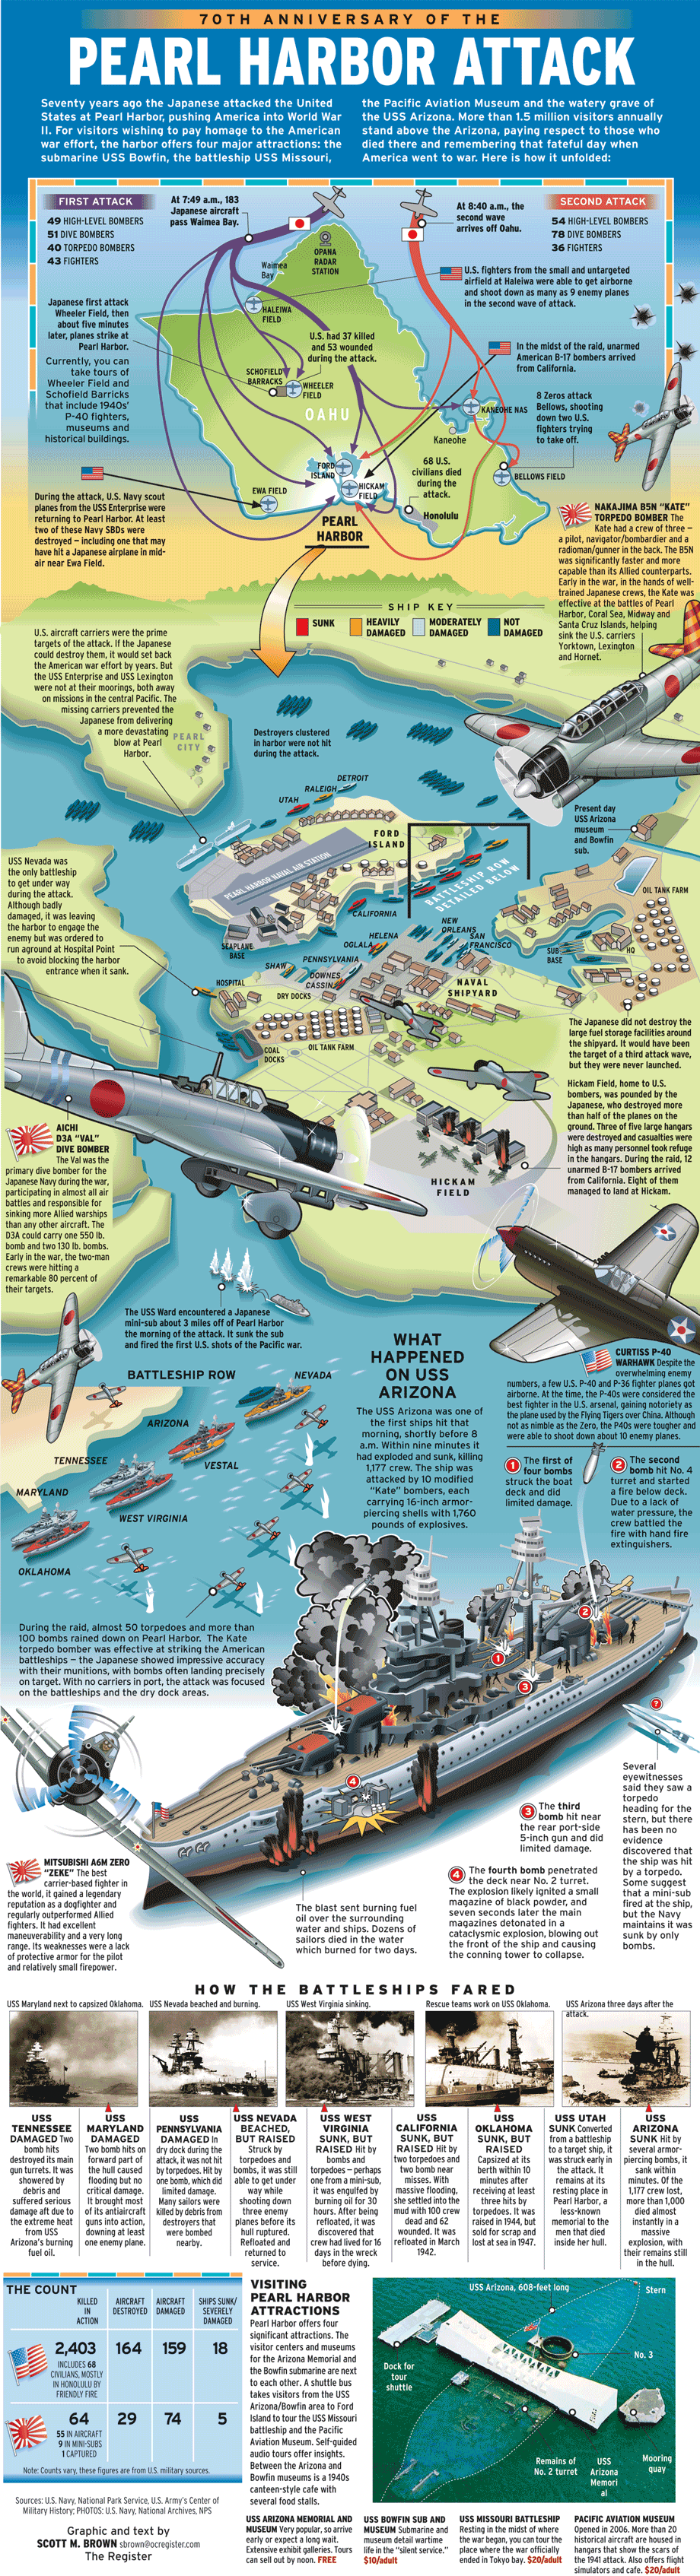 Pearl Harbor Attack Infographic